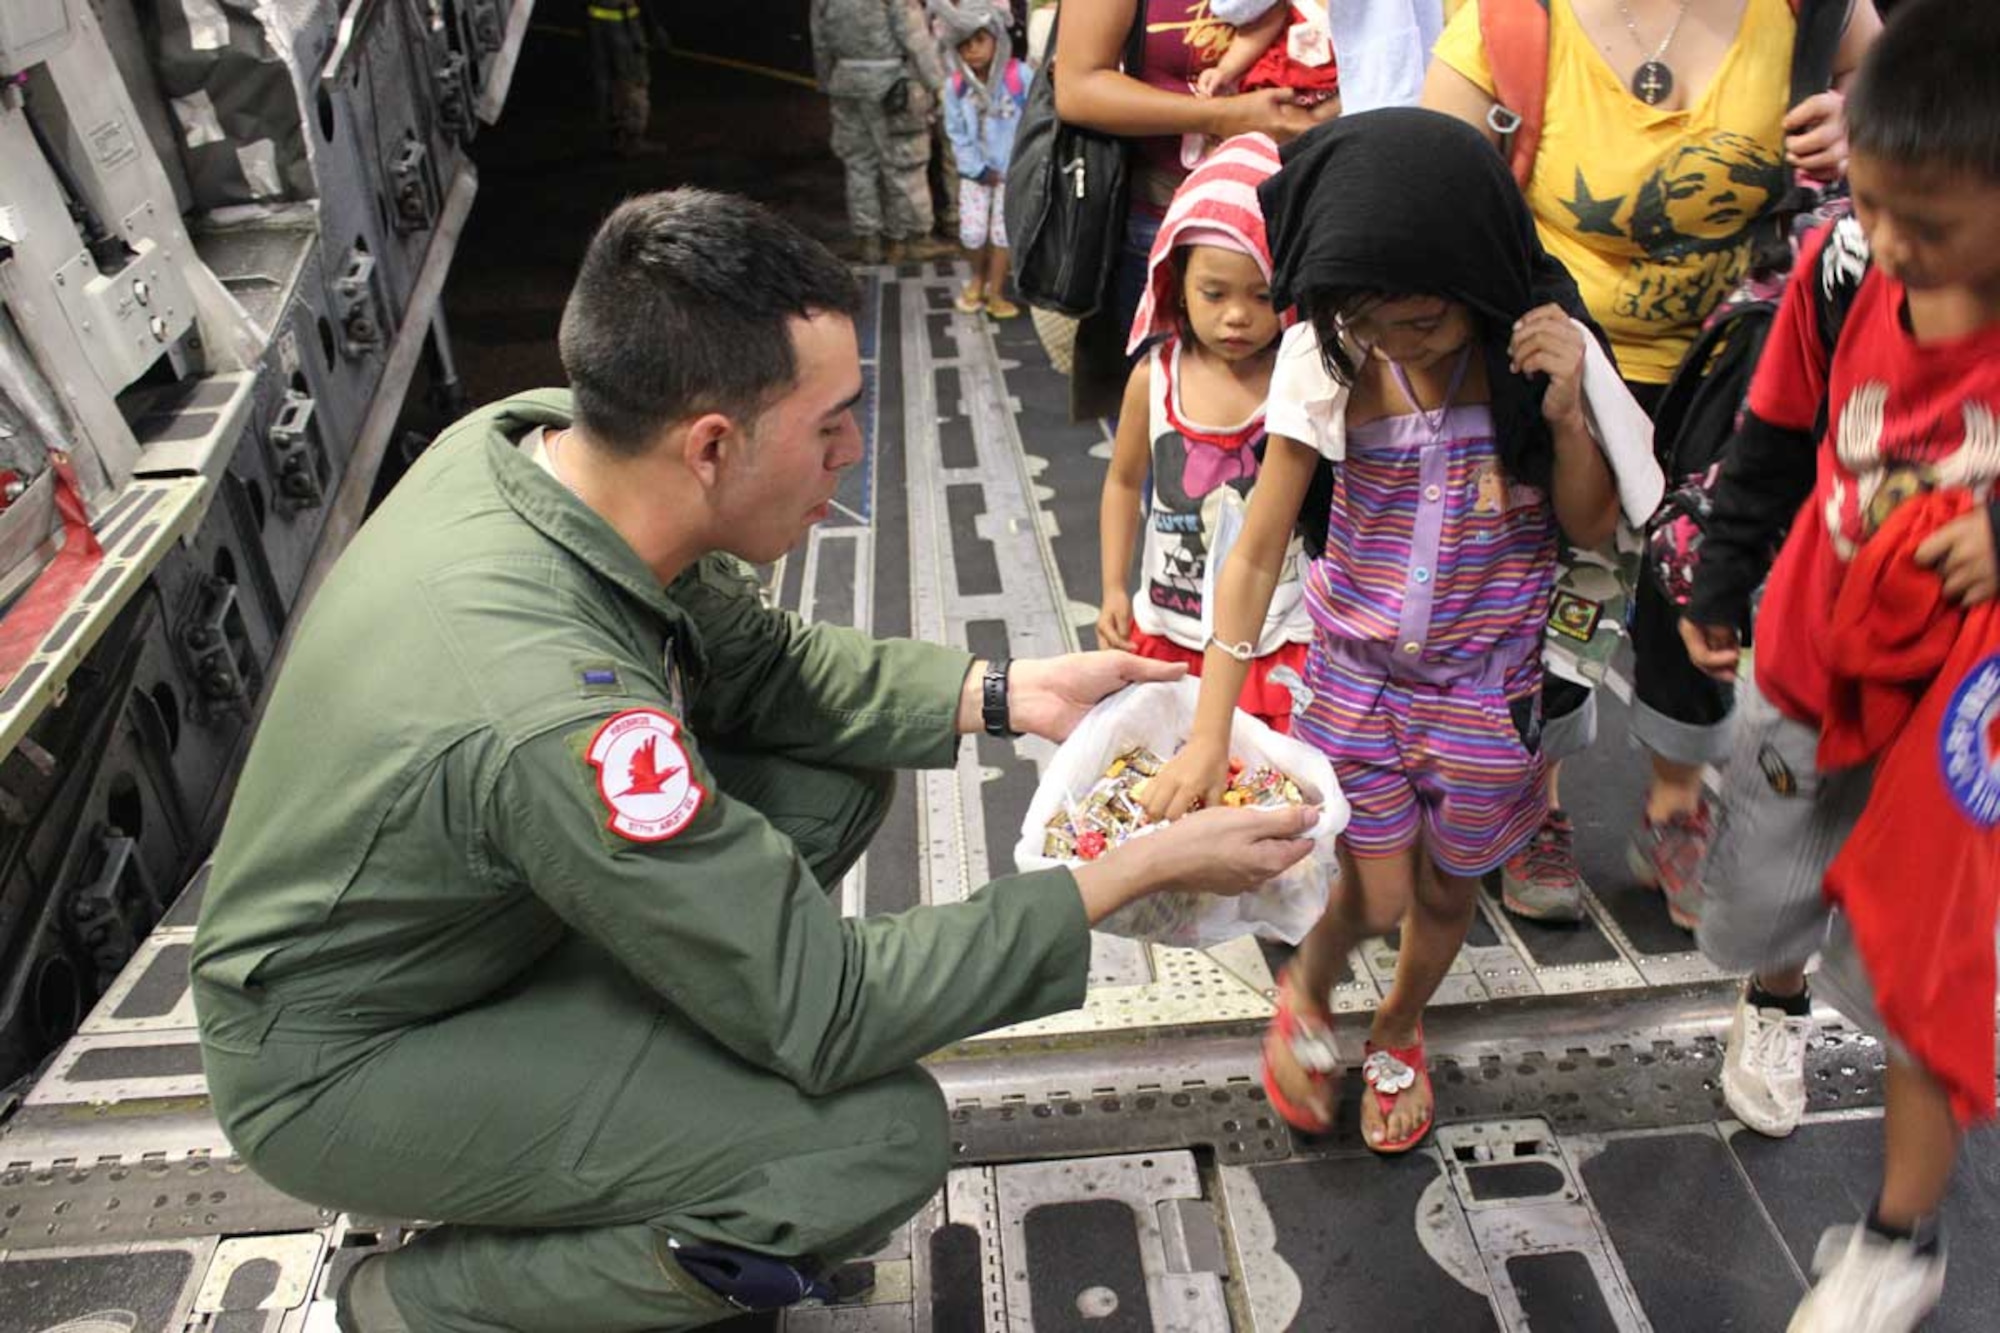 U.S. Air Force 1st Lt. Evan Lomeli, 517th Airlift Squadron C-17 Globemaster III pilot, hands out candy to children as they board a C-17 to be transported within the Philippines as part of Operation Damayan, Nov. 21. Operation Damayan is a humanitarian aid and disaster relief operation led by the Philippine government and supported by a multinational response force. The transport process was overseen by a joint service operation and the Armed Forces of the Philippines. (Courtesy photo)